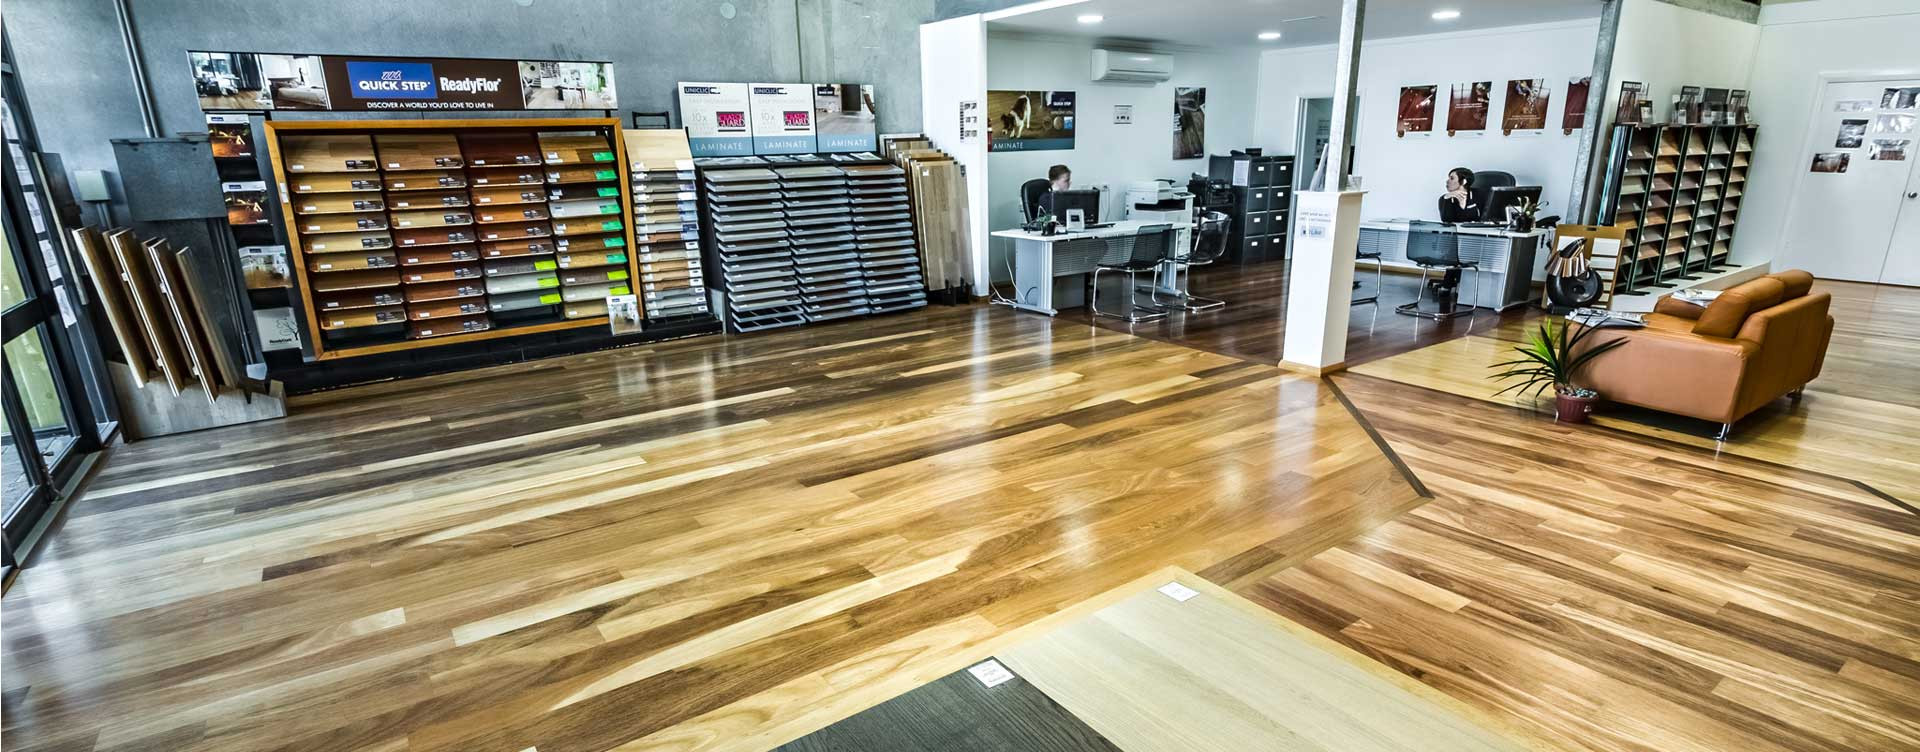 how to install floating hardwood floors on concrete of timber flooring perth coastal flooring wa quality wooden with regard to thats why they call us the home of fine wood floors